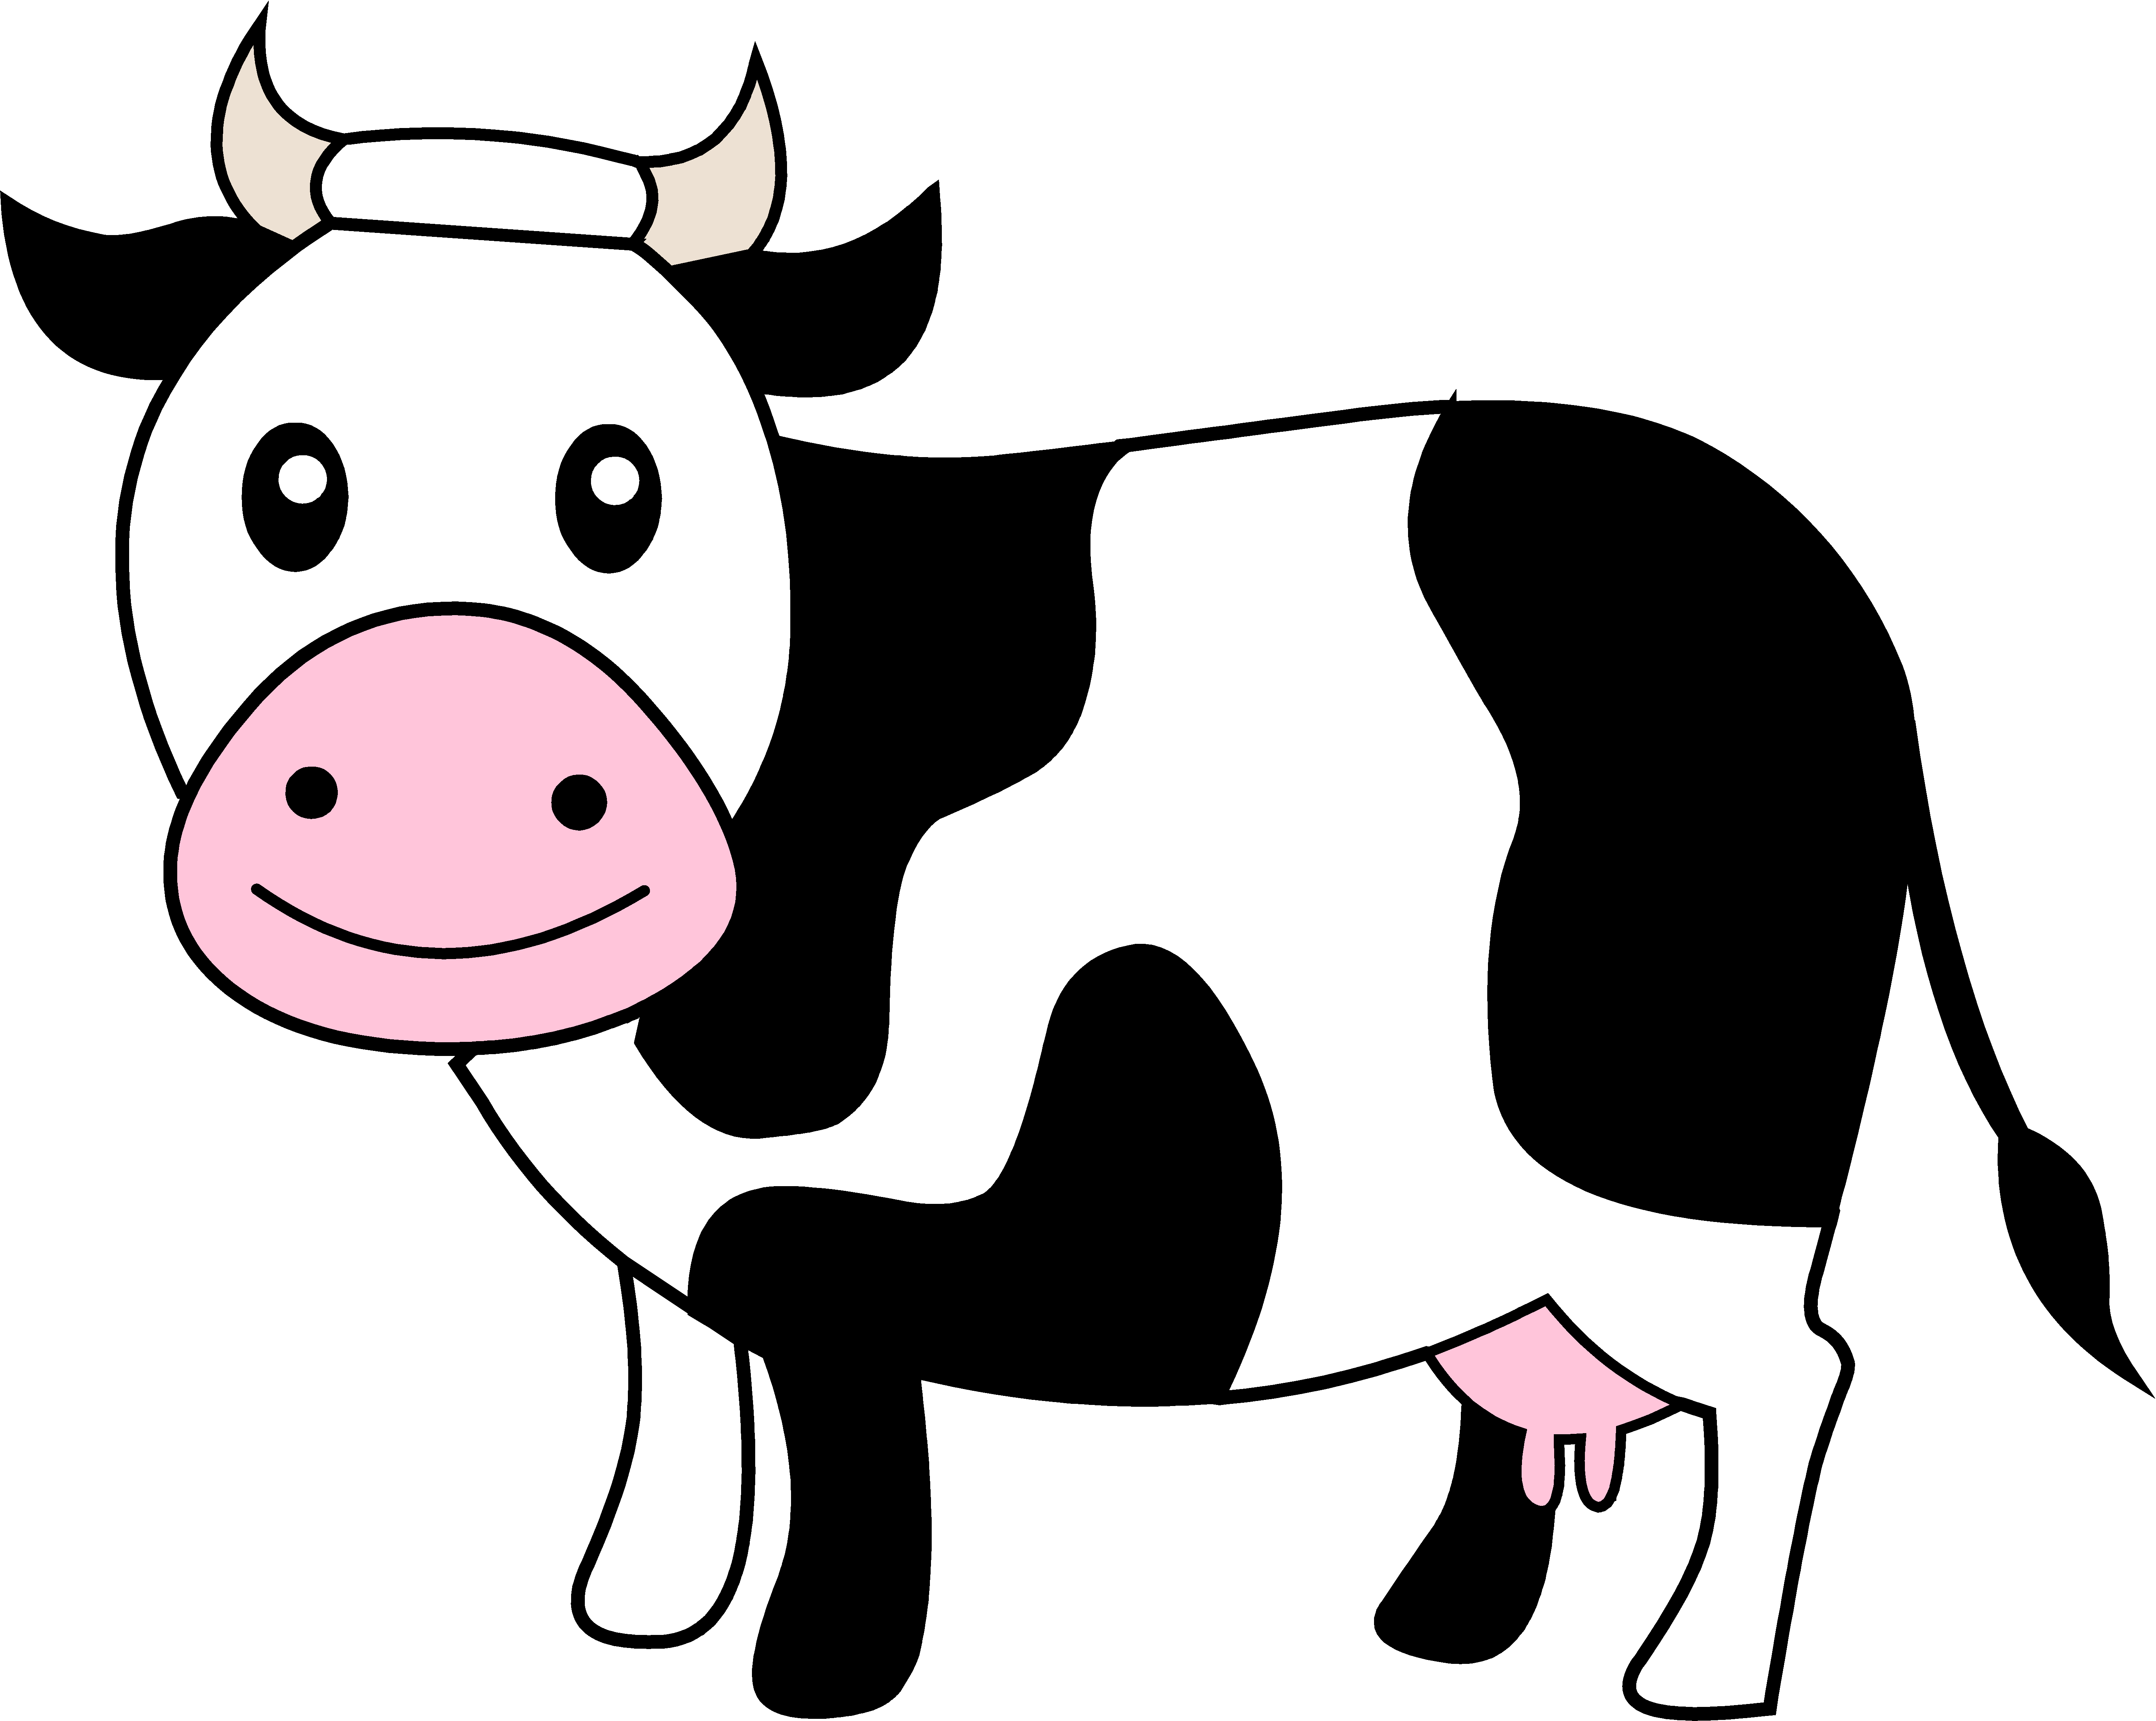 Cow with milk clipart